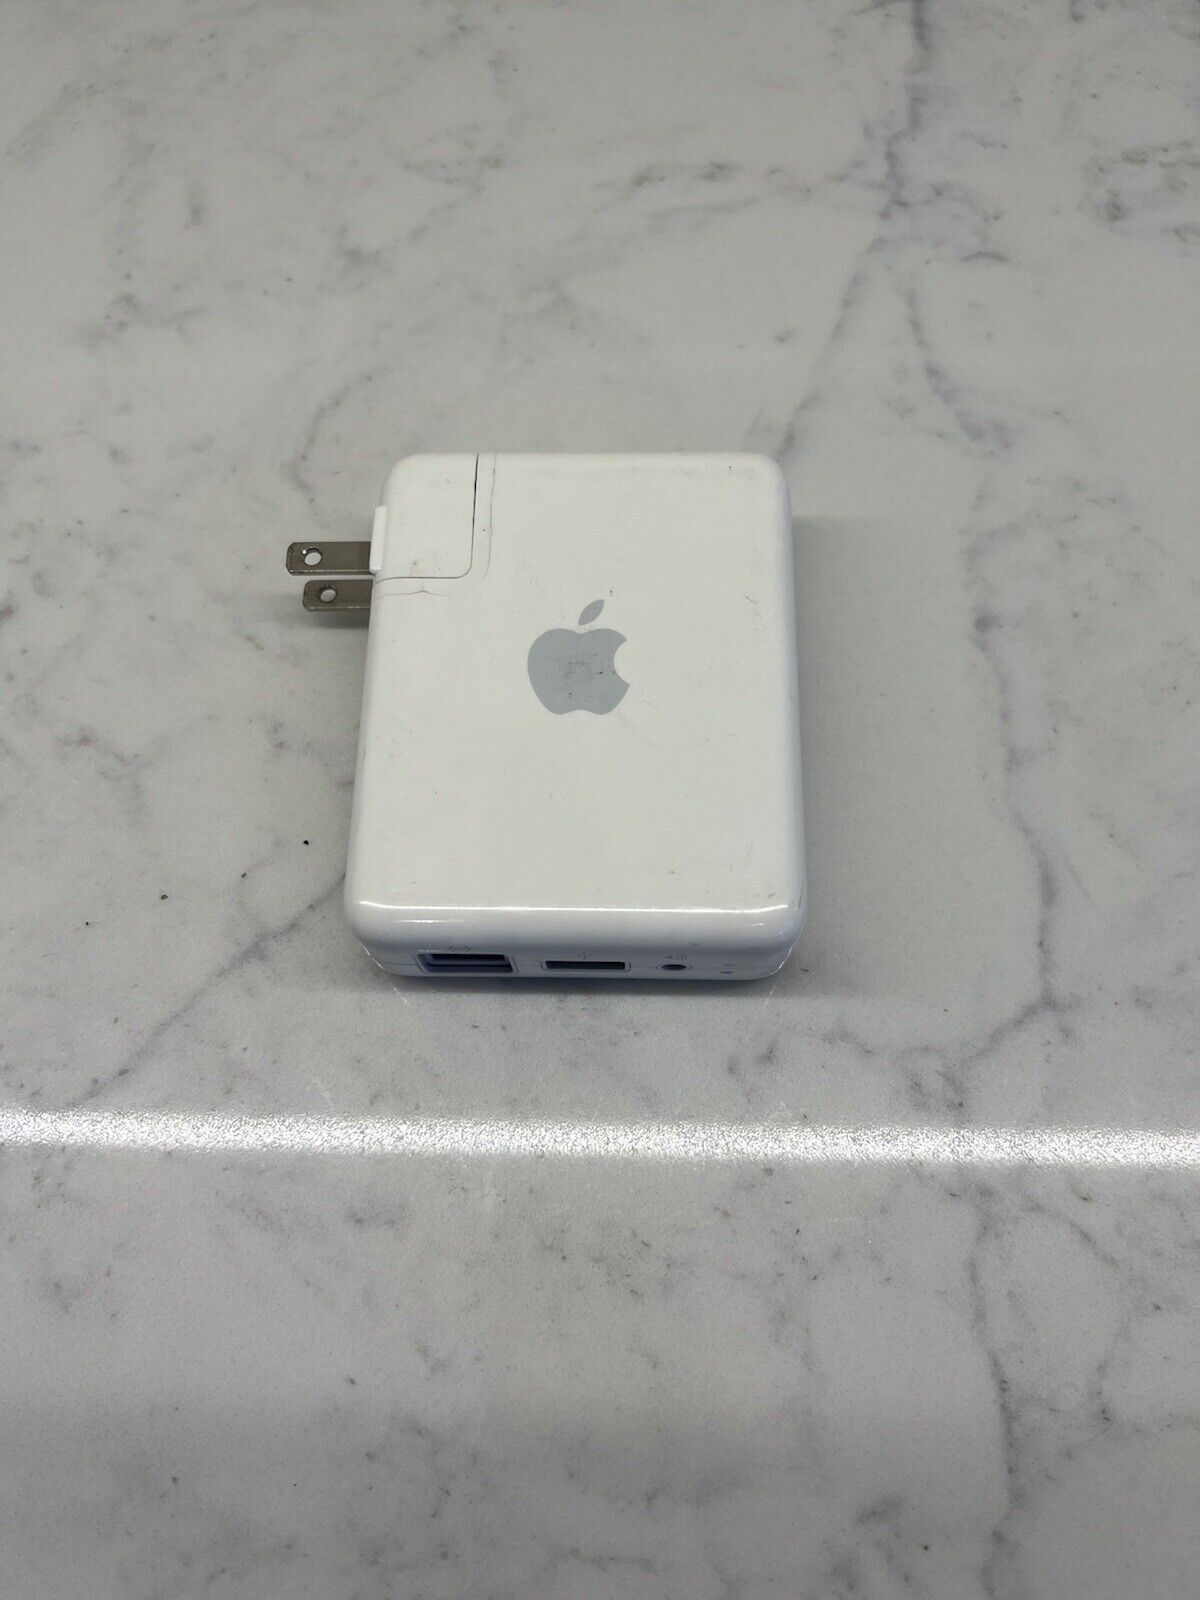 Apple AirPort Express 802.11n Base Station A1264 (1st Gen) Wifi Router/ Extender